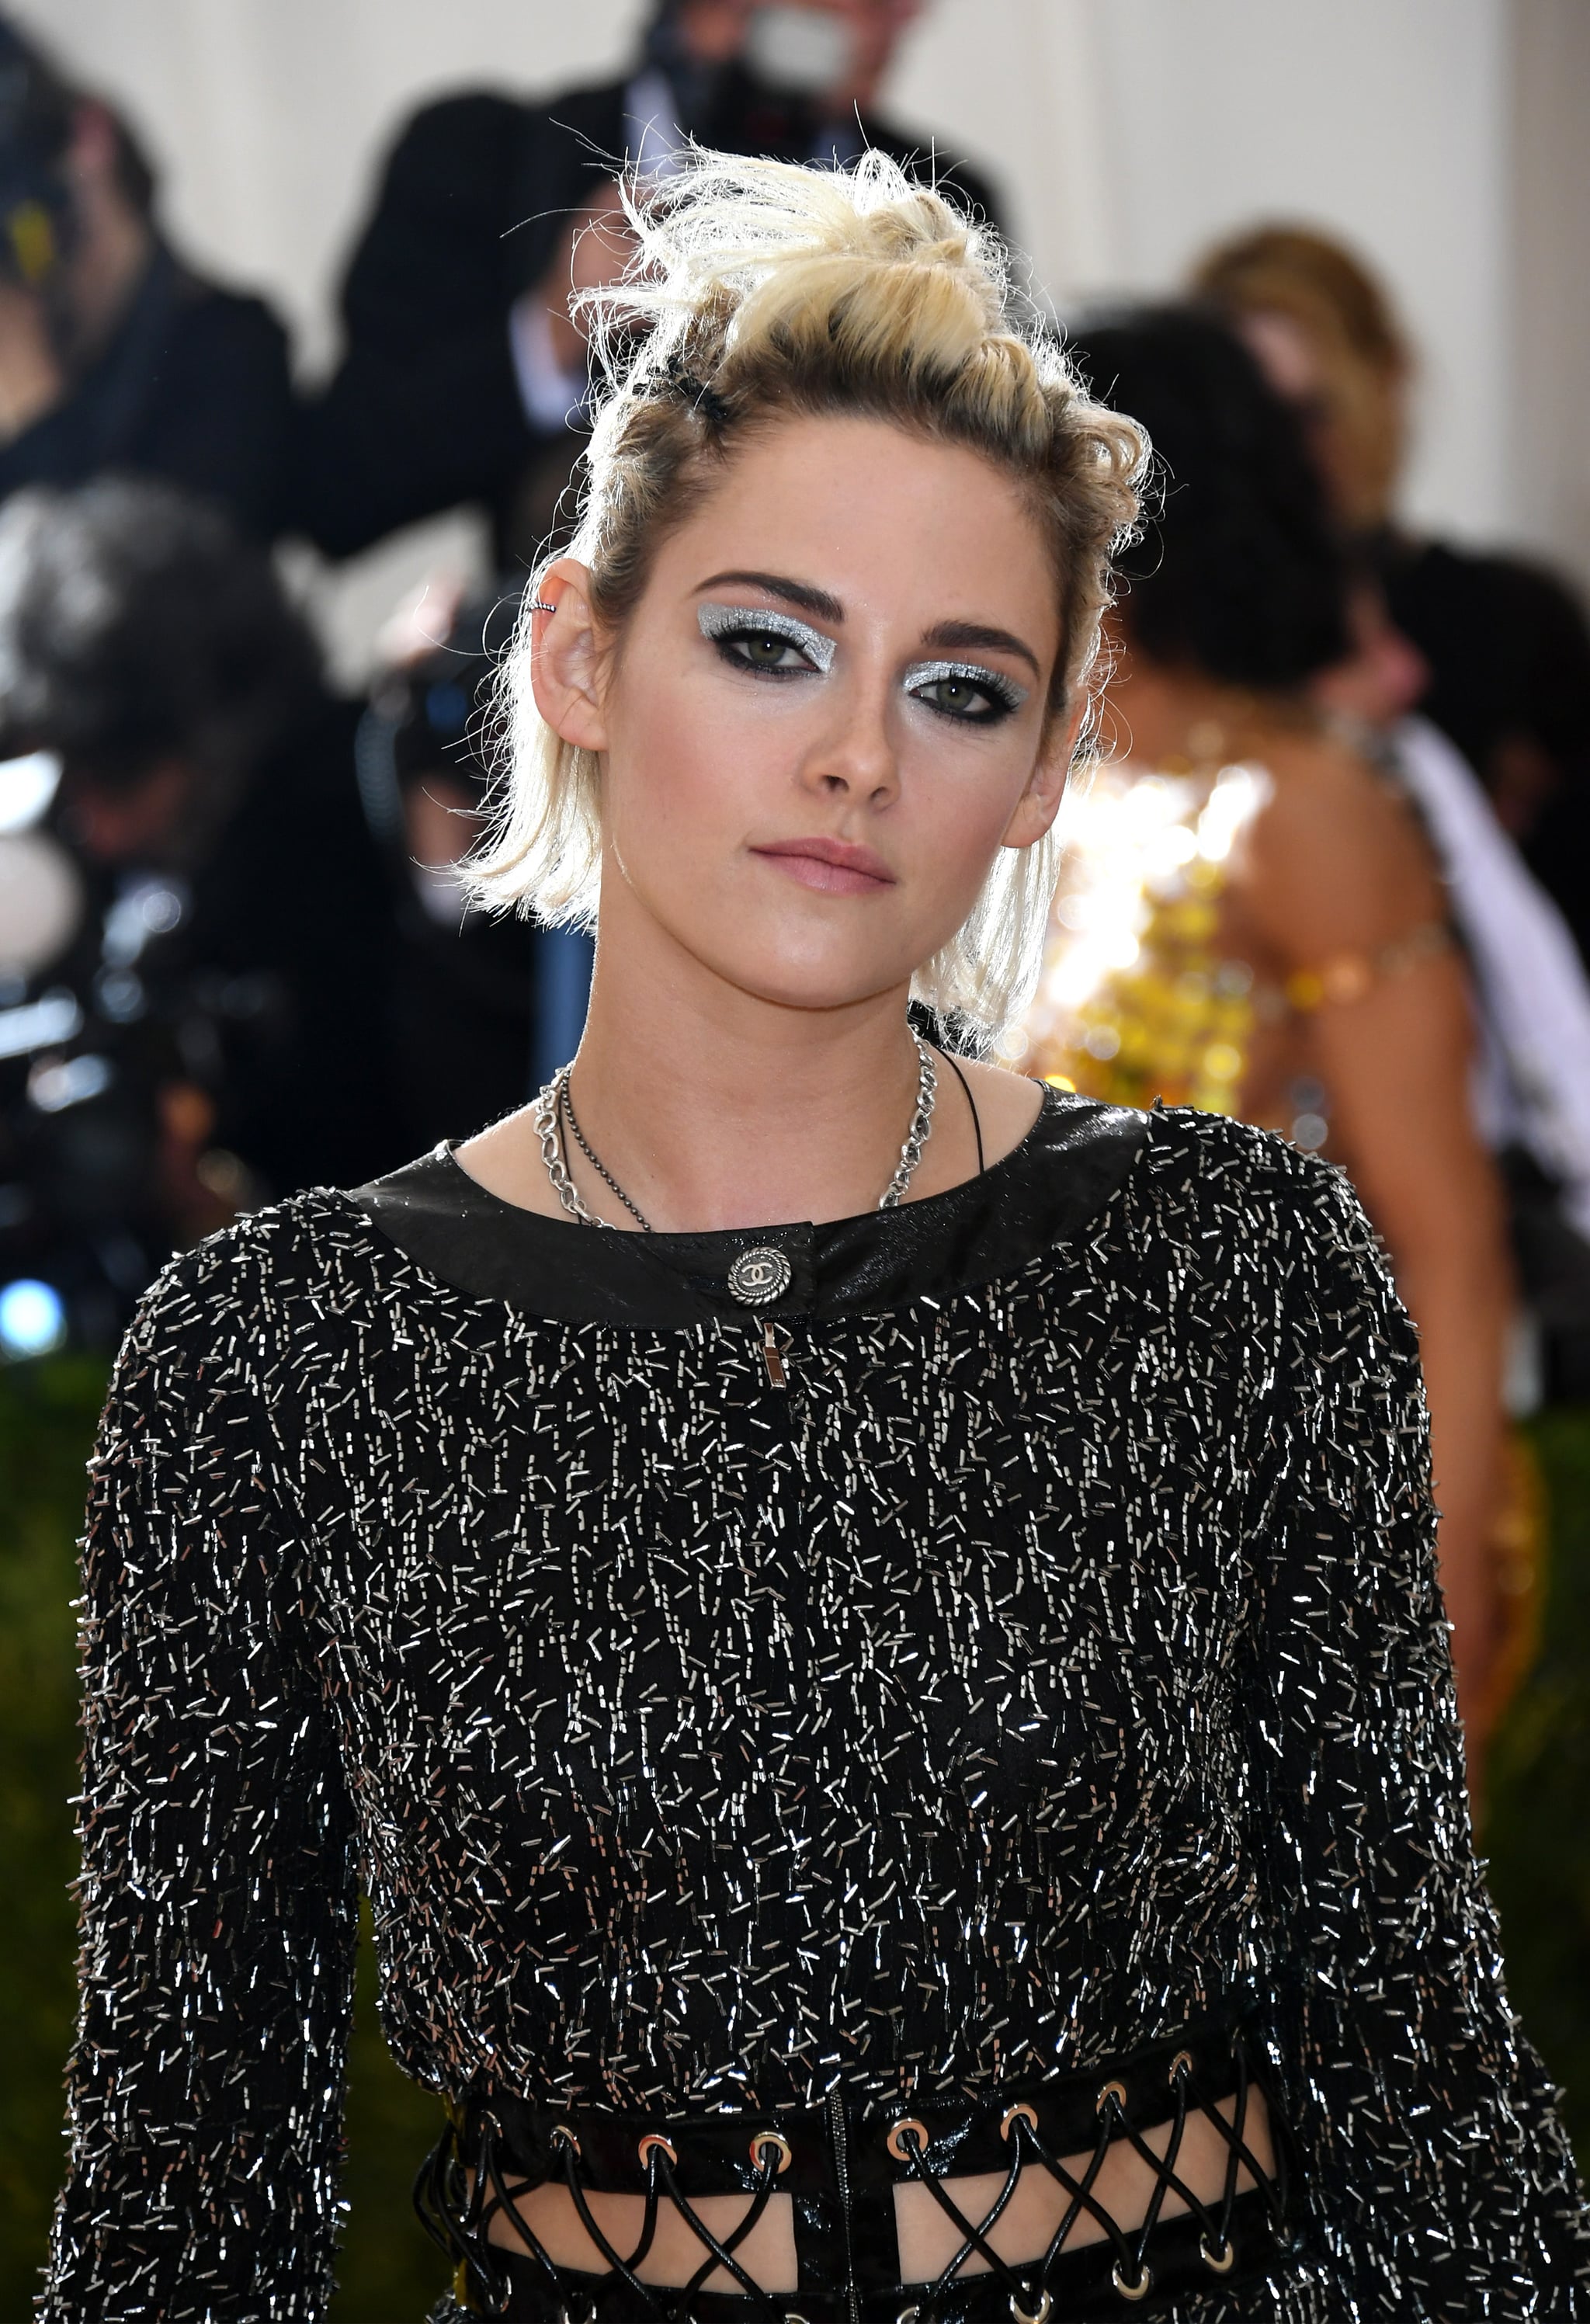 Kristen Stewart Experiments With a New '50s Fringe for the Met Gala 2021